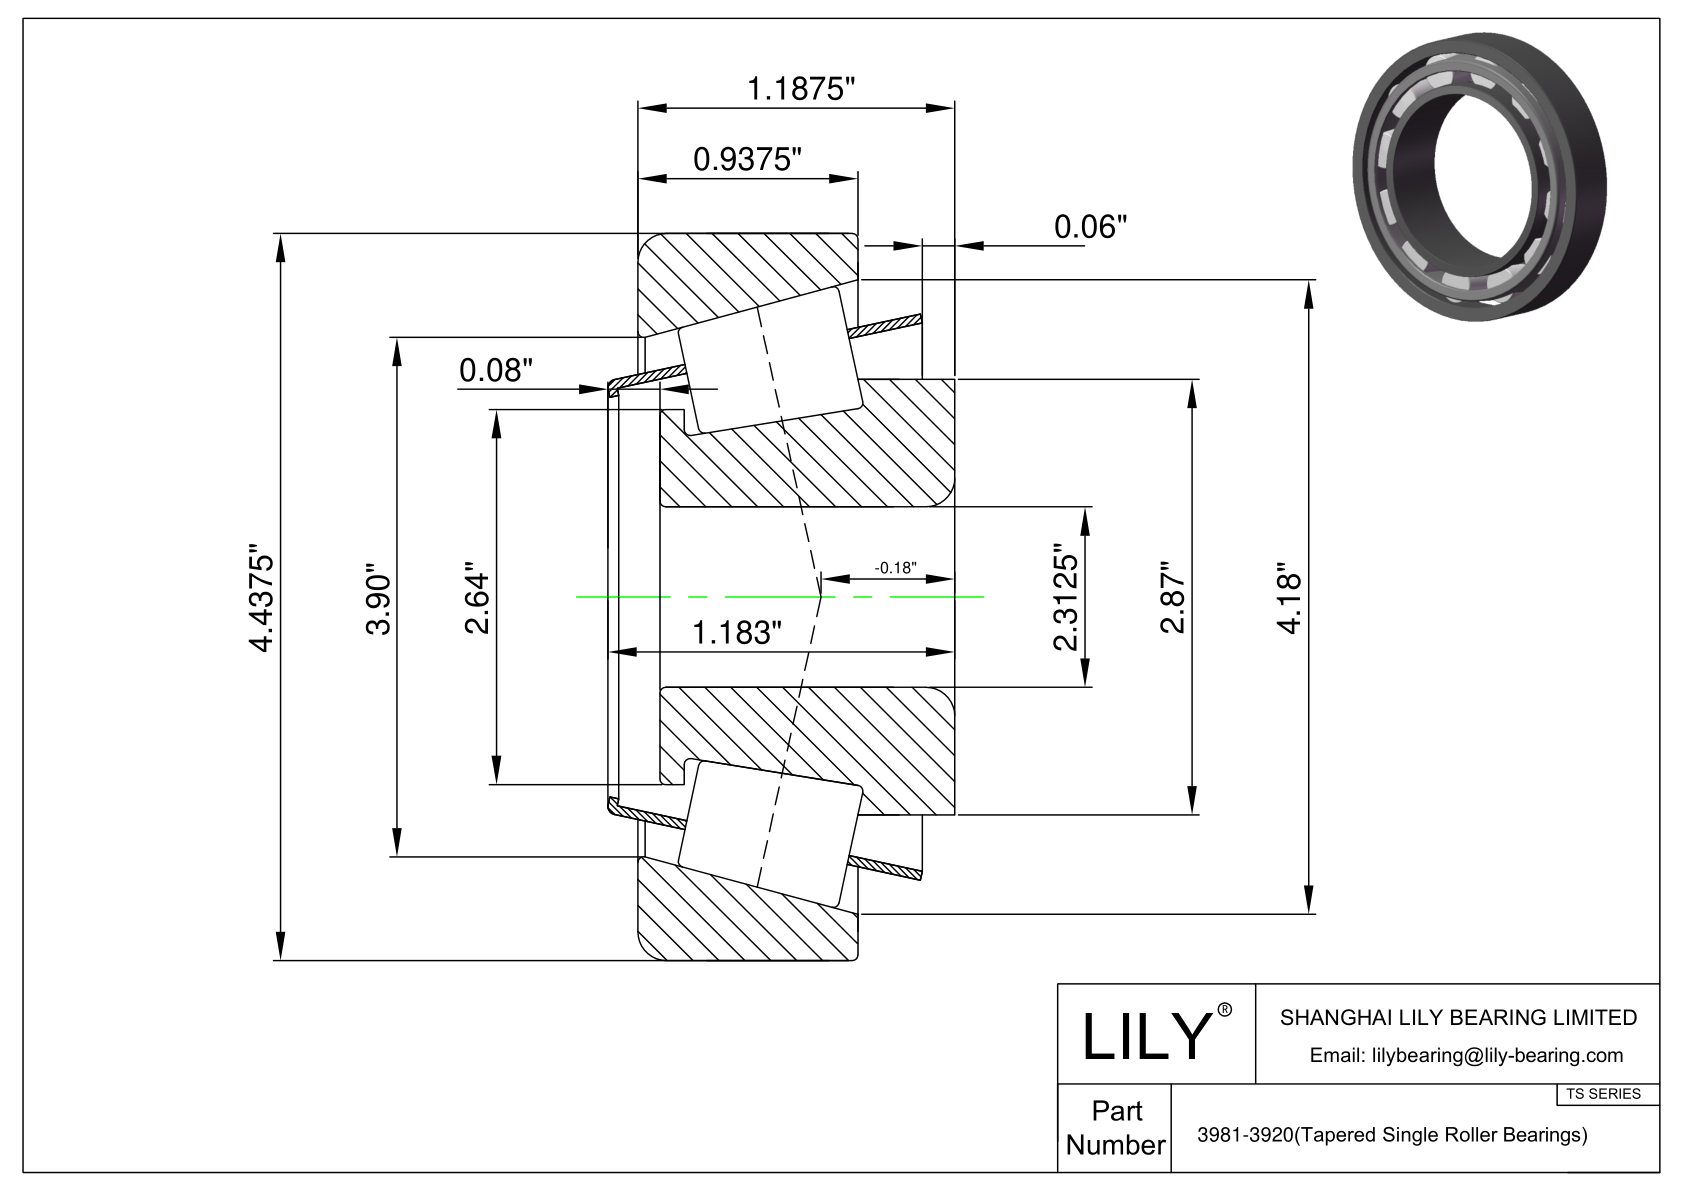 3981-3920 TS (Tapered Single Roller Bearings) (Imperial) cad drawing